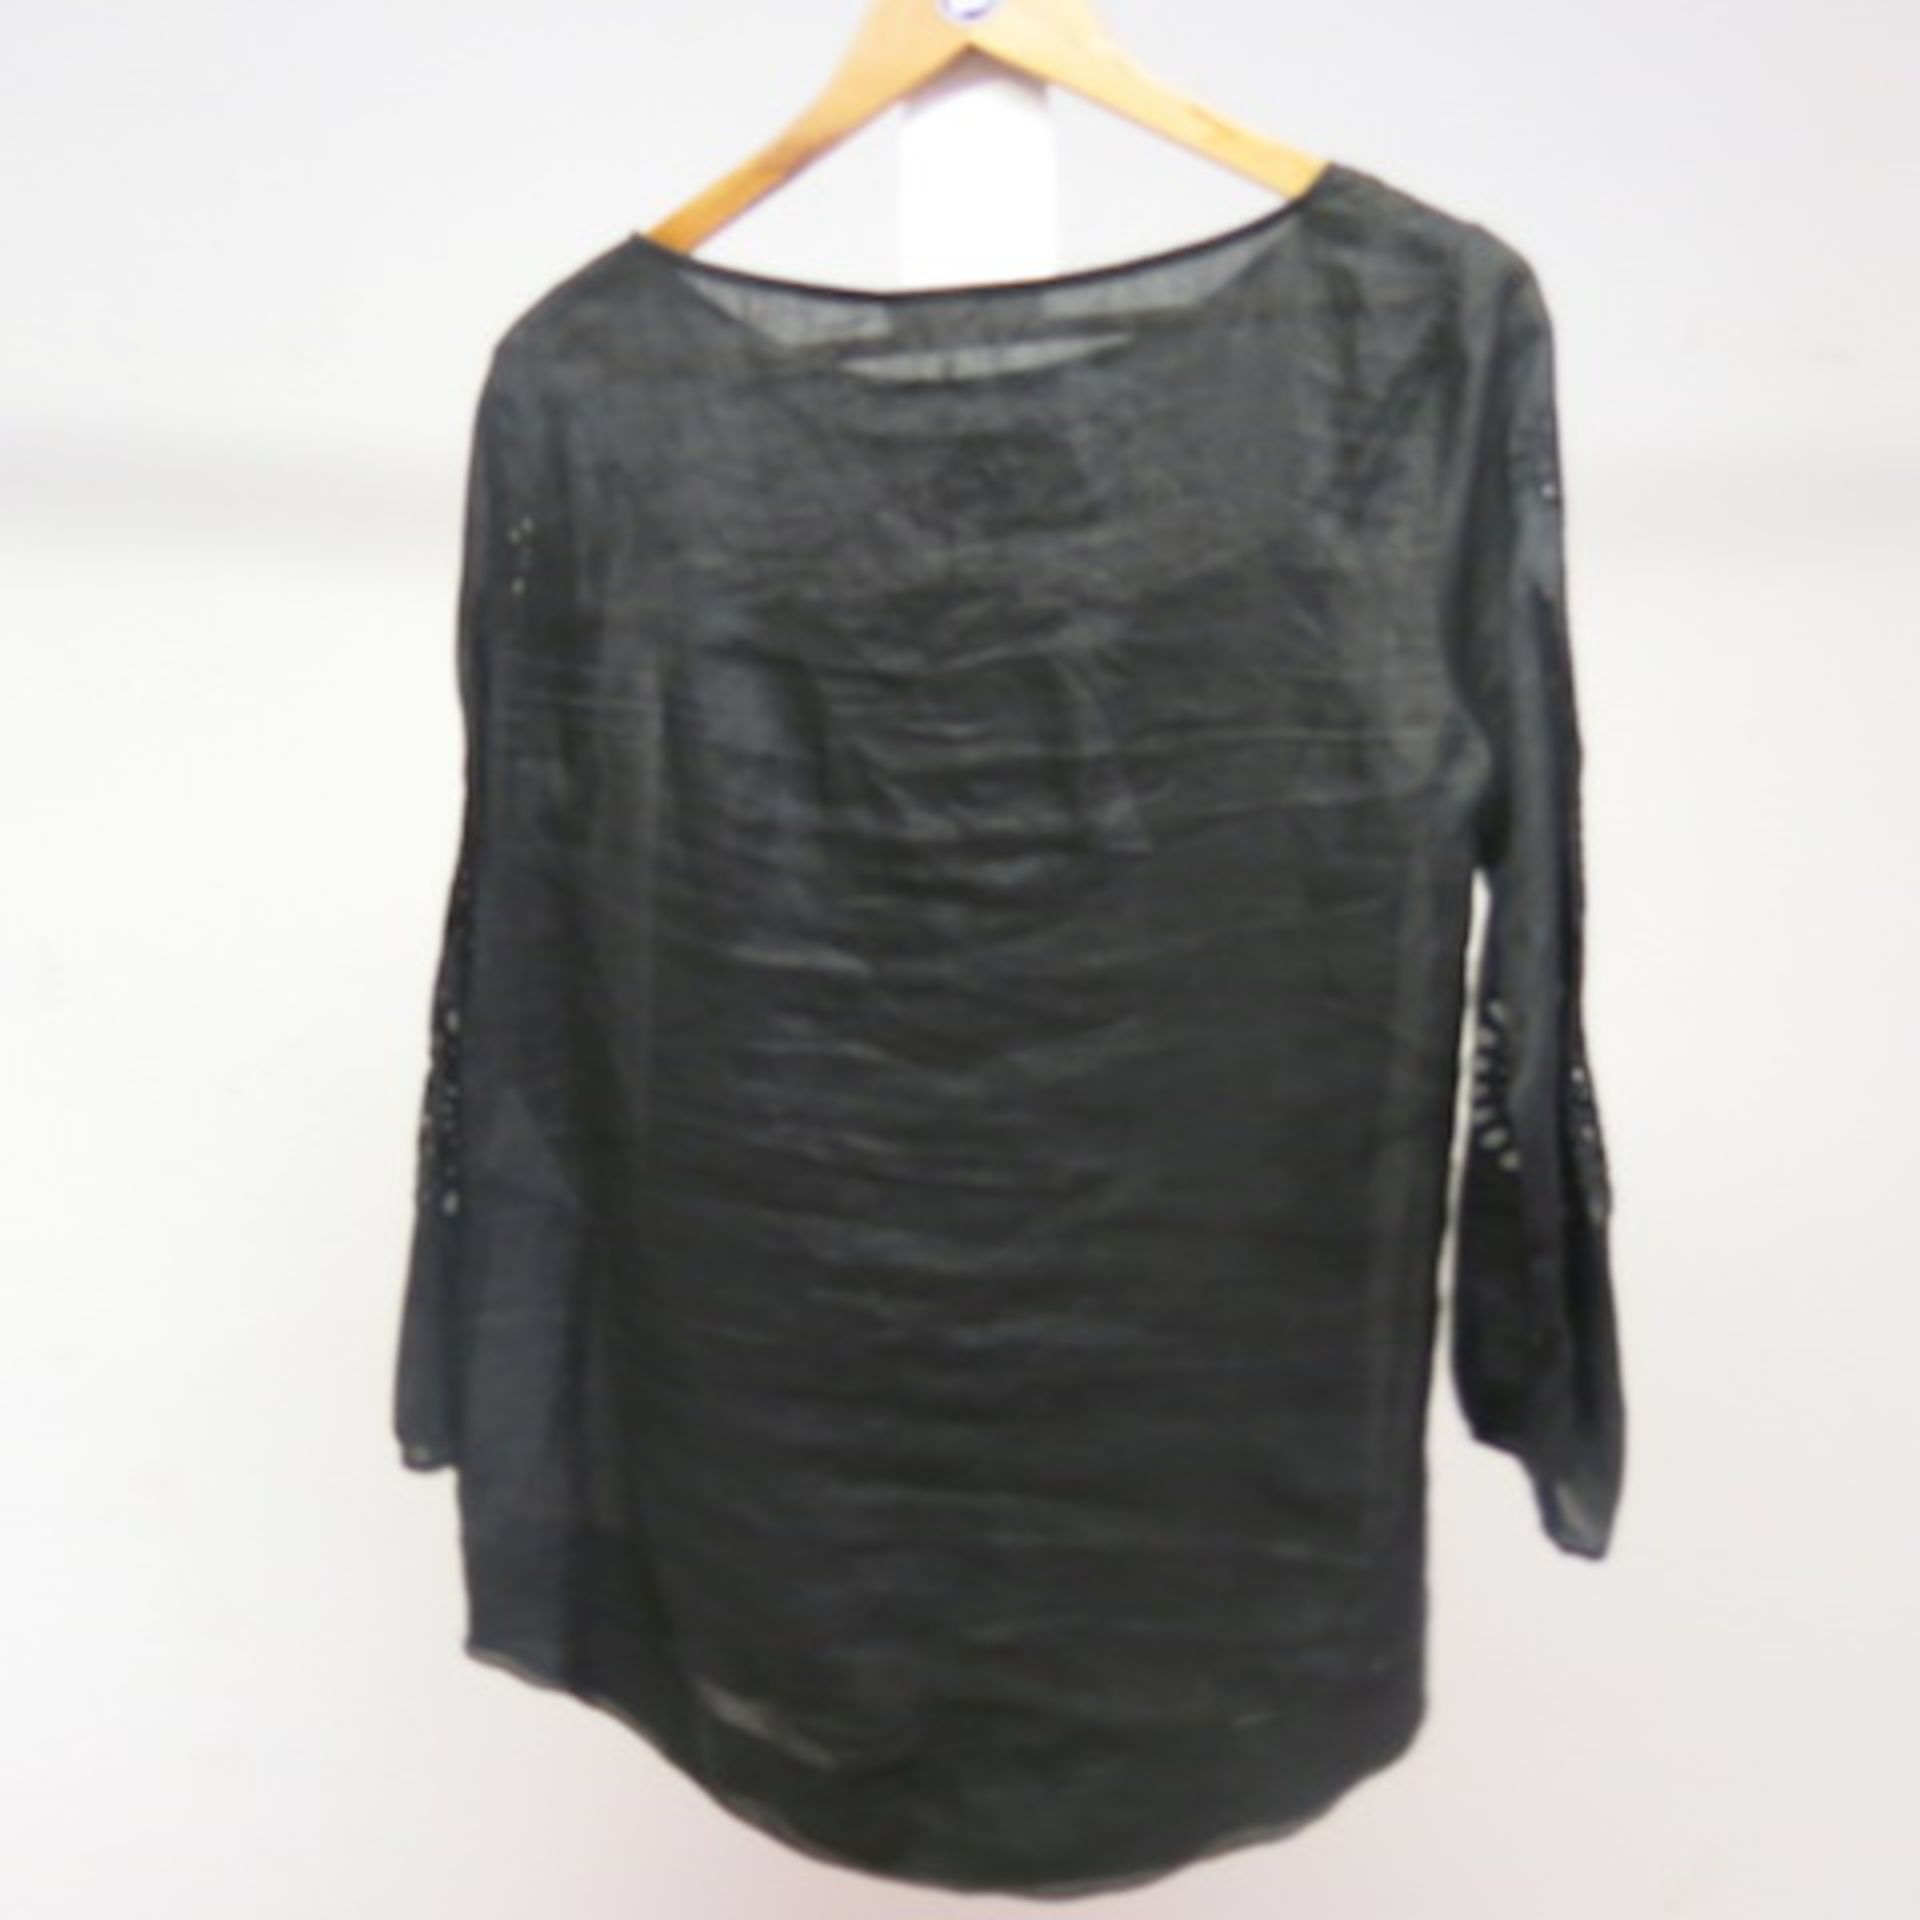 Maxmara Black Embrodied Sleeve Top, Size Small, RRP £209.00 - Image 5 of 5